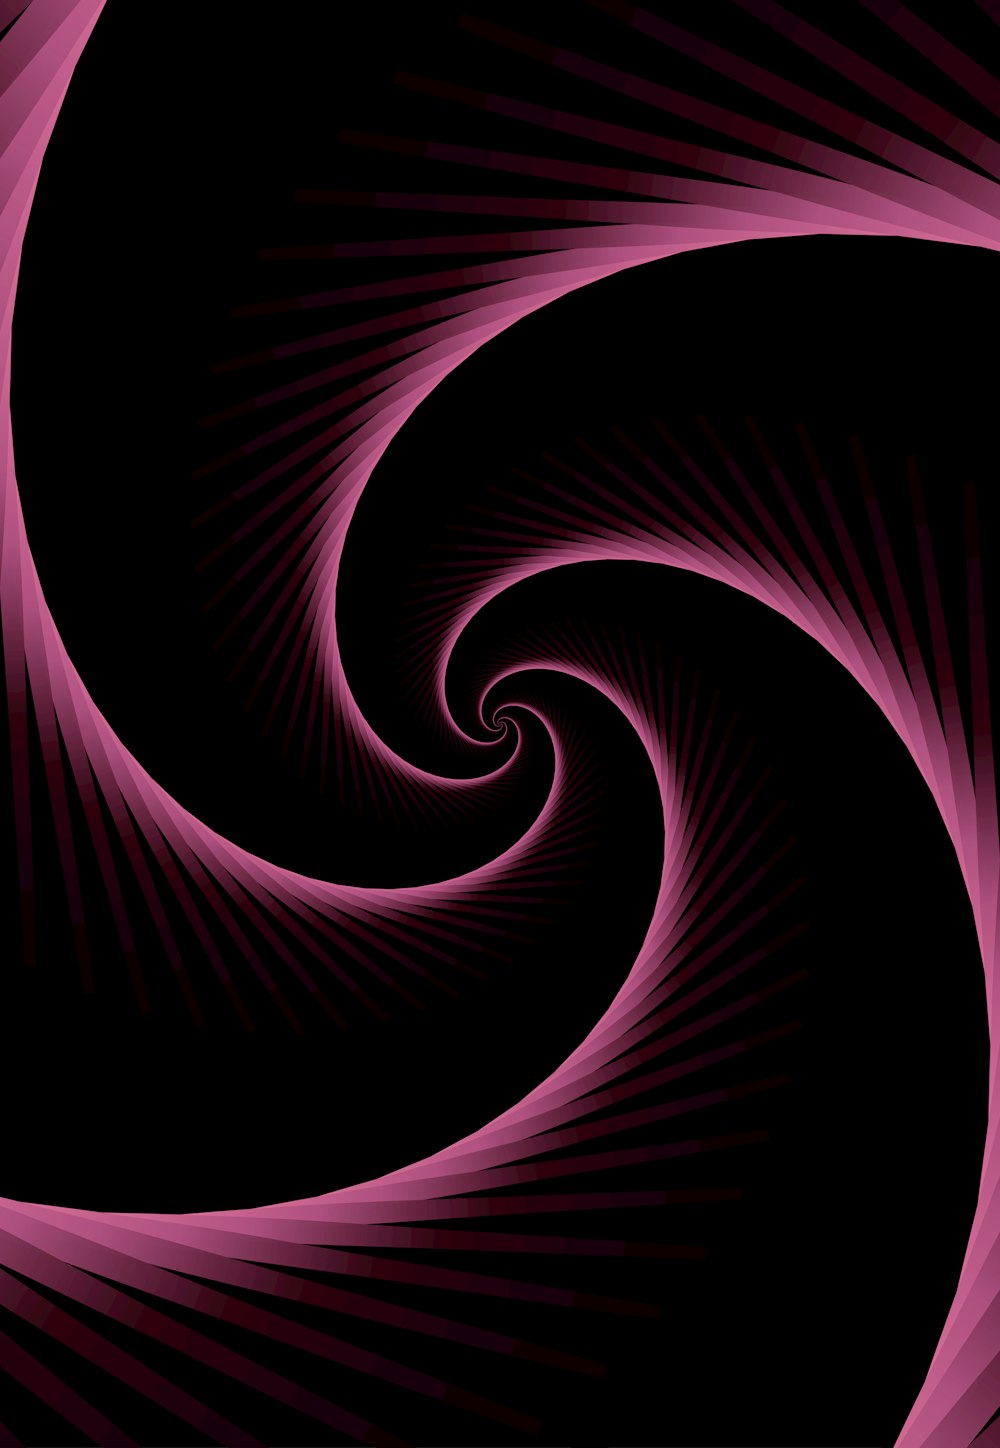 a computer generated image of a pink spiral